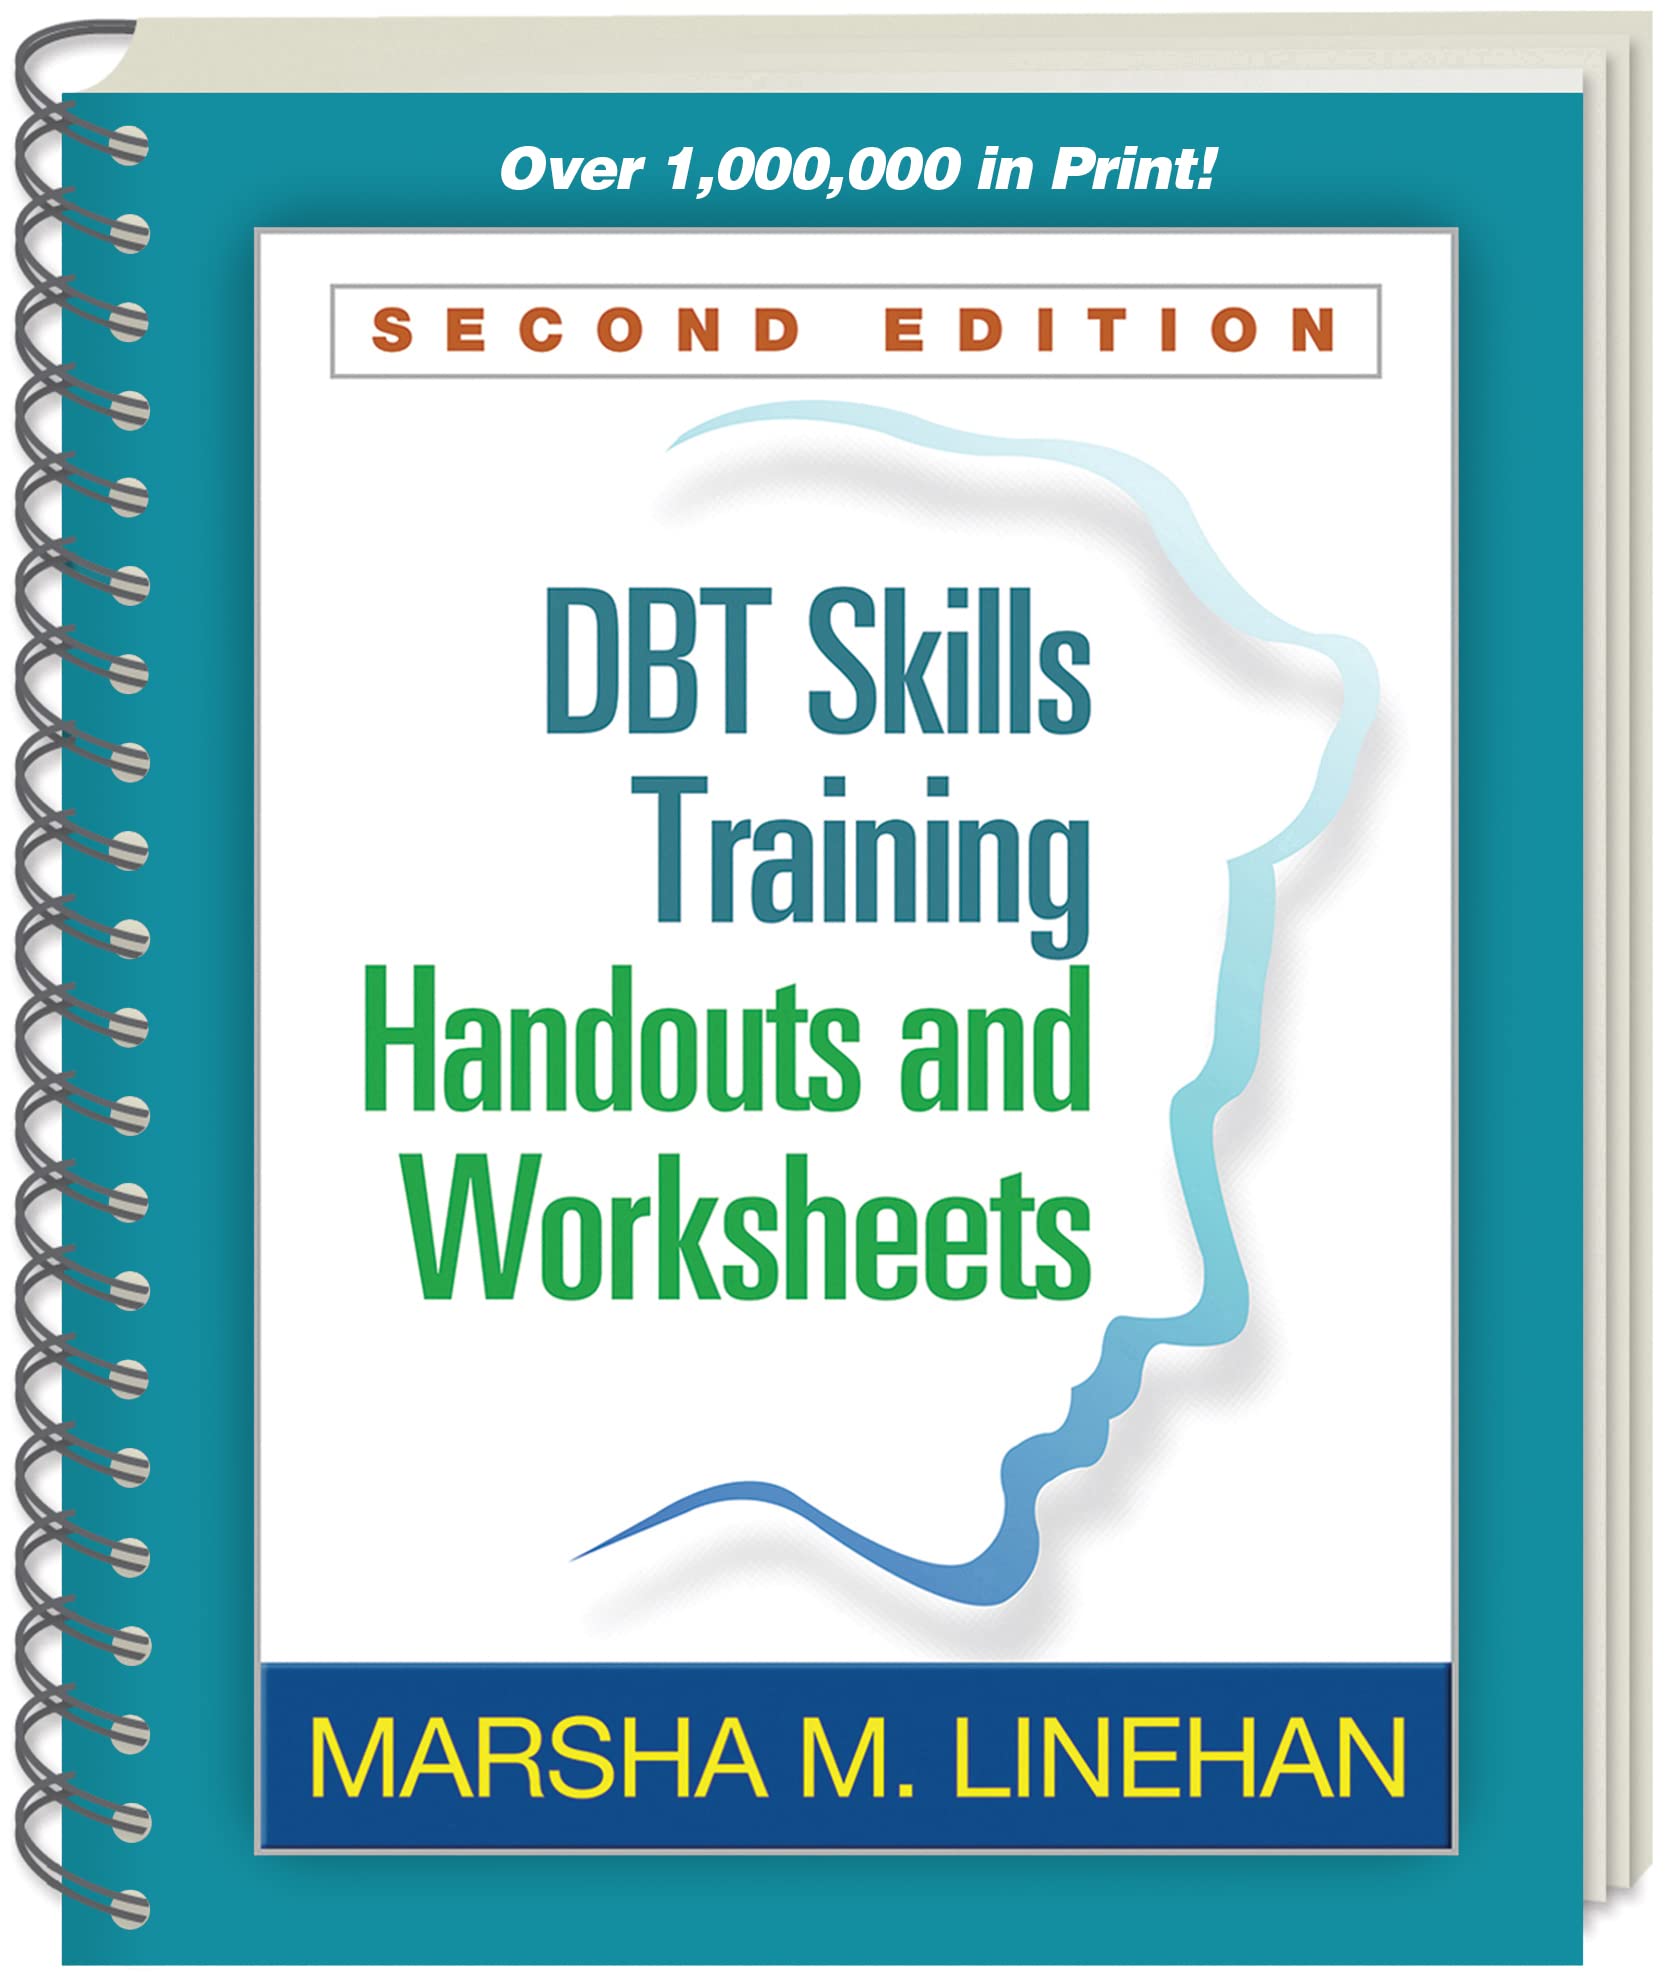 Dbt Skills Training Handouts and Worksheets, Second Edition by Linehan, Marsha M.